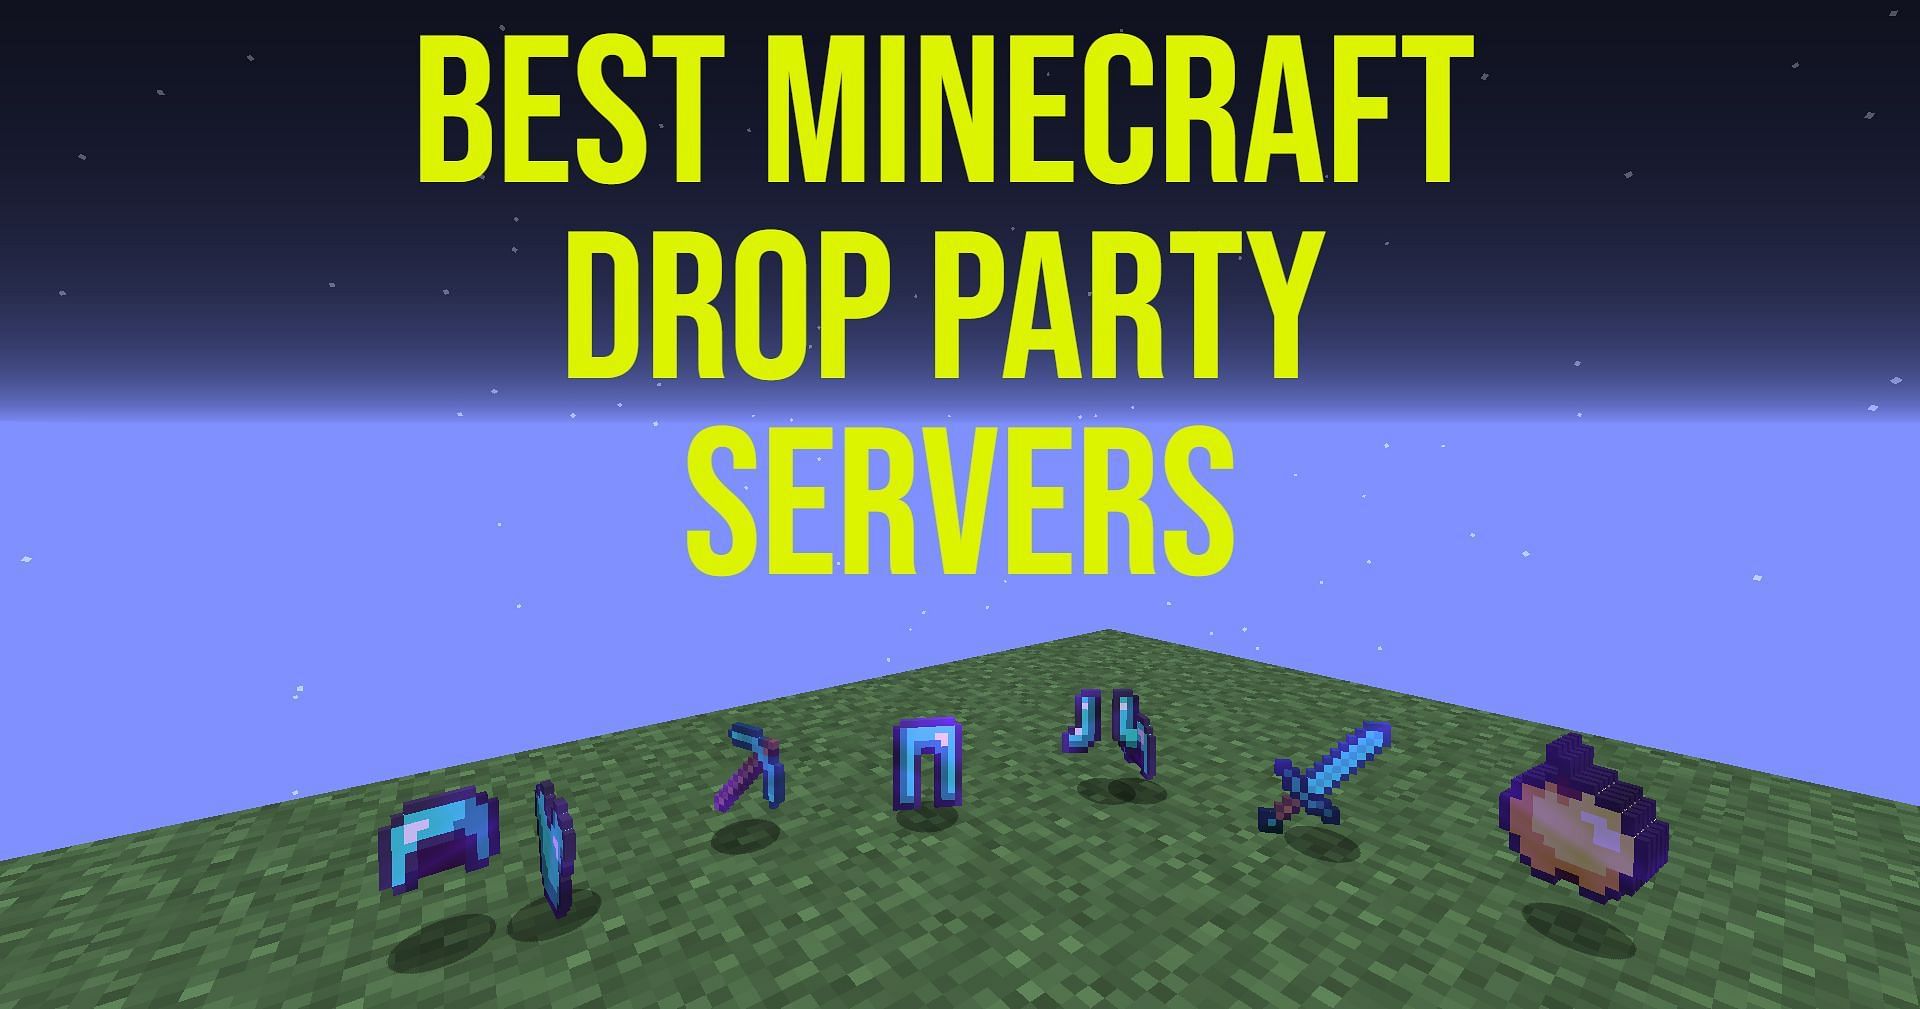 Minecraft Drop Party servers are great for players looking for new places to play (Image via Sportskeeda)